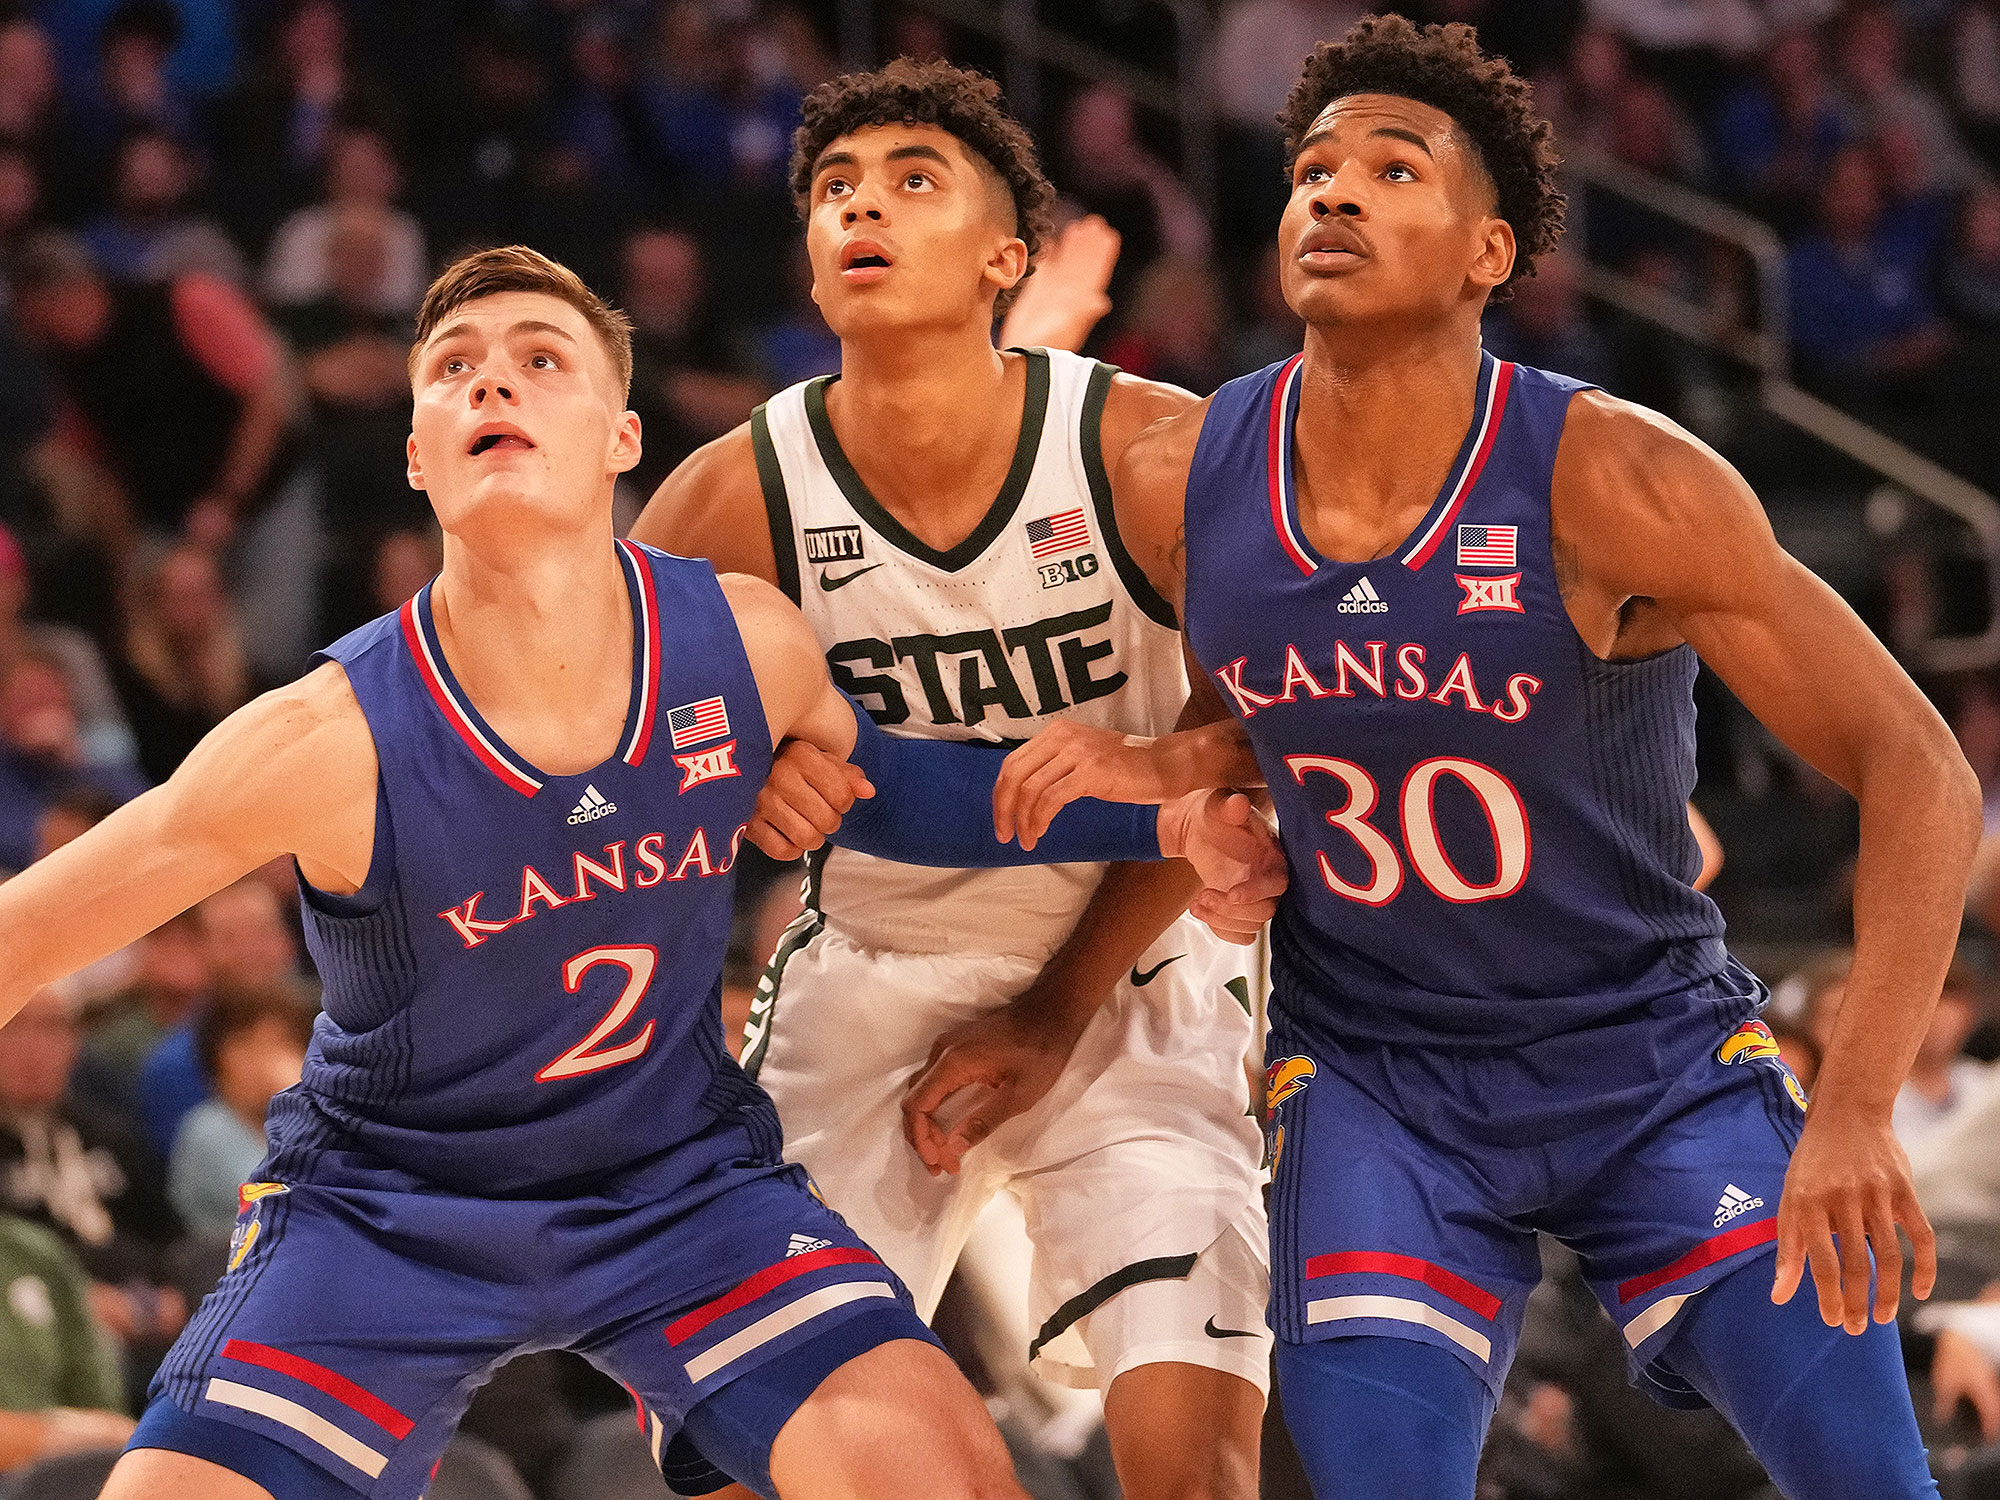 Kansas and Michigan State players battle for a rebound